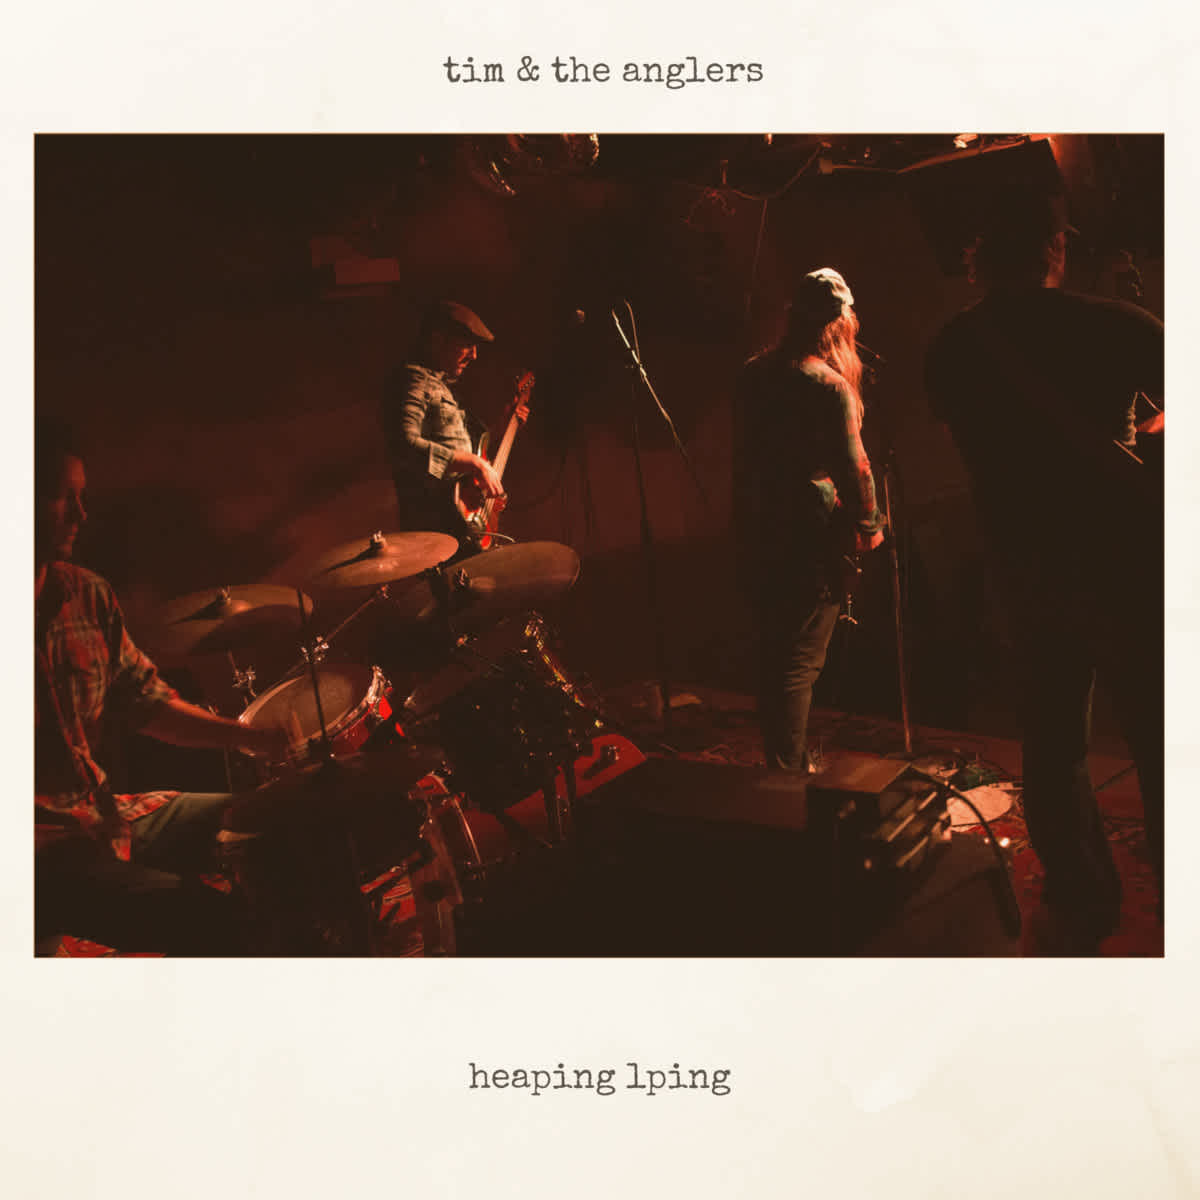 Album cover for Tim & The Anglers record Heaping LPing